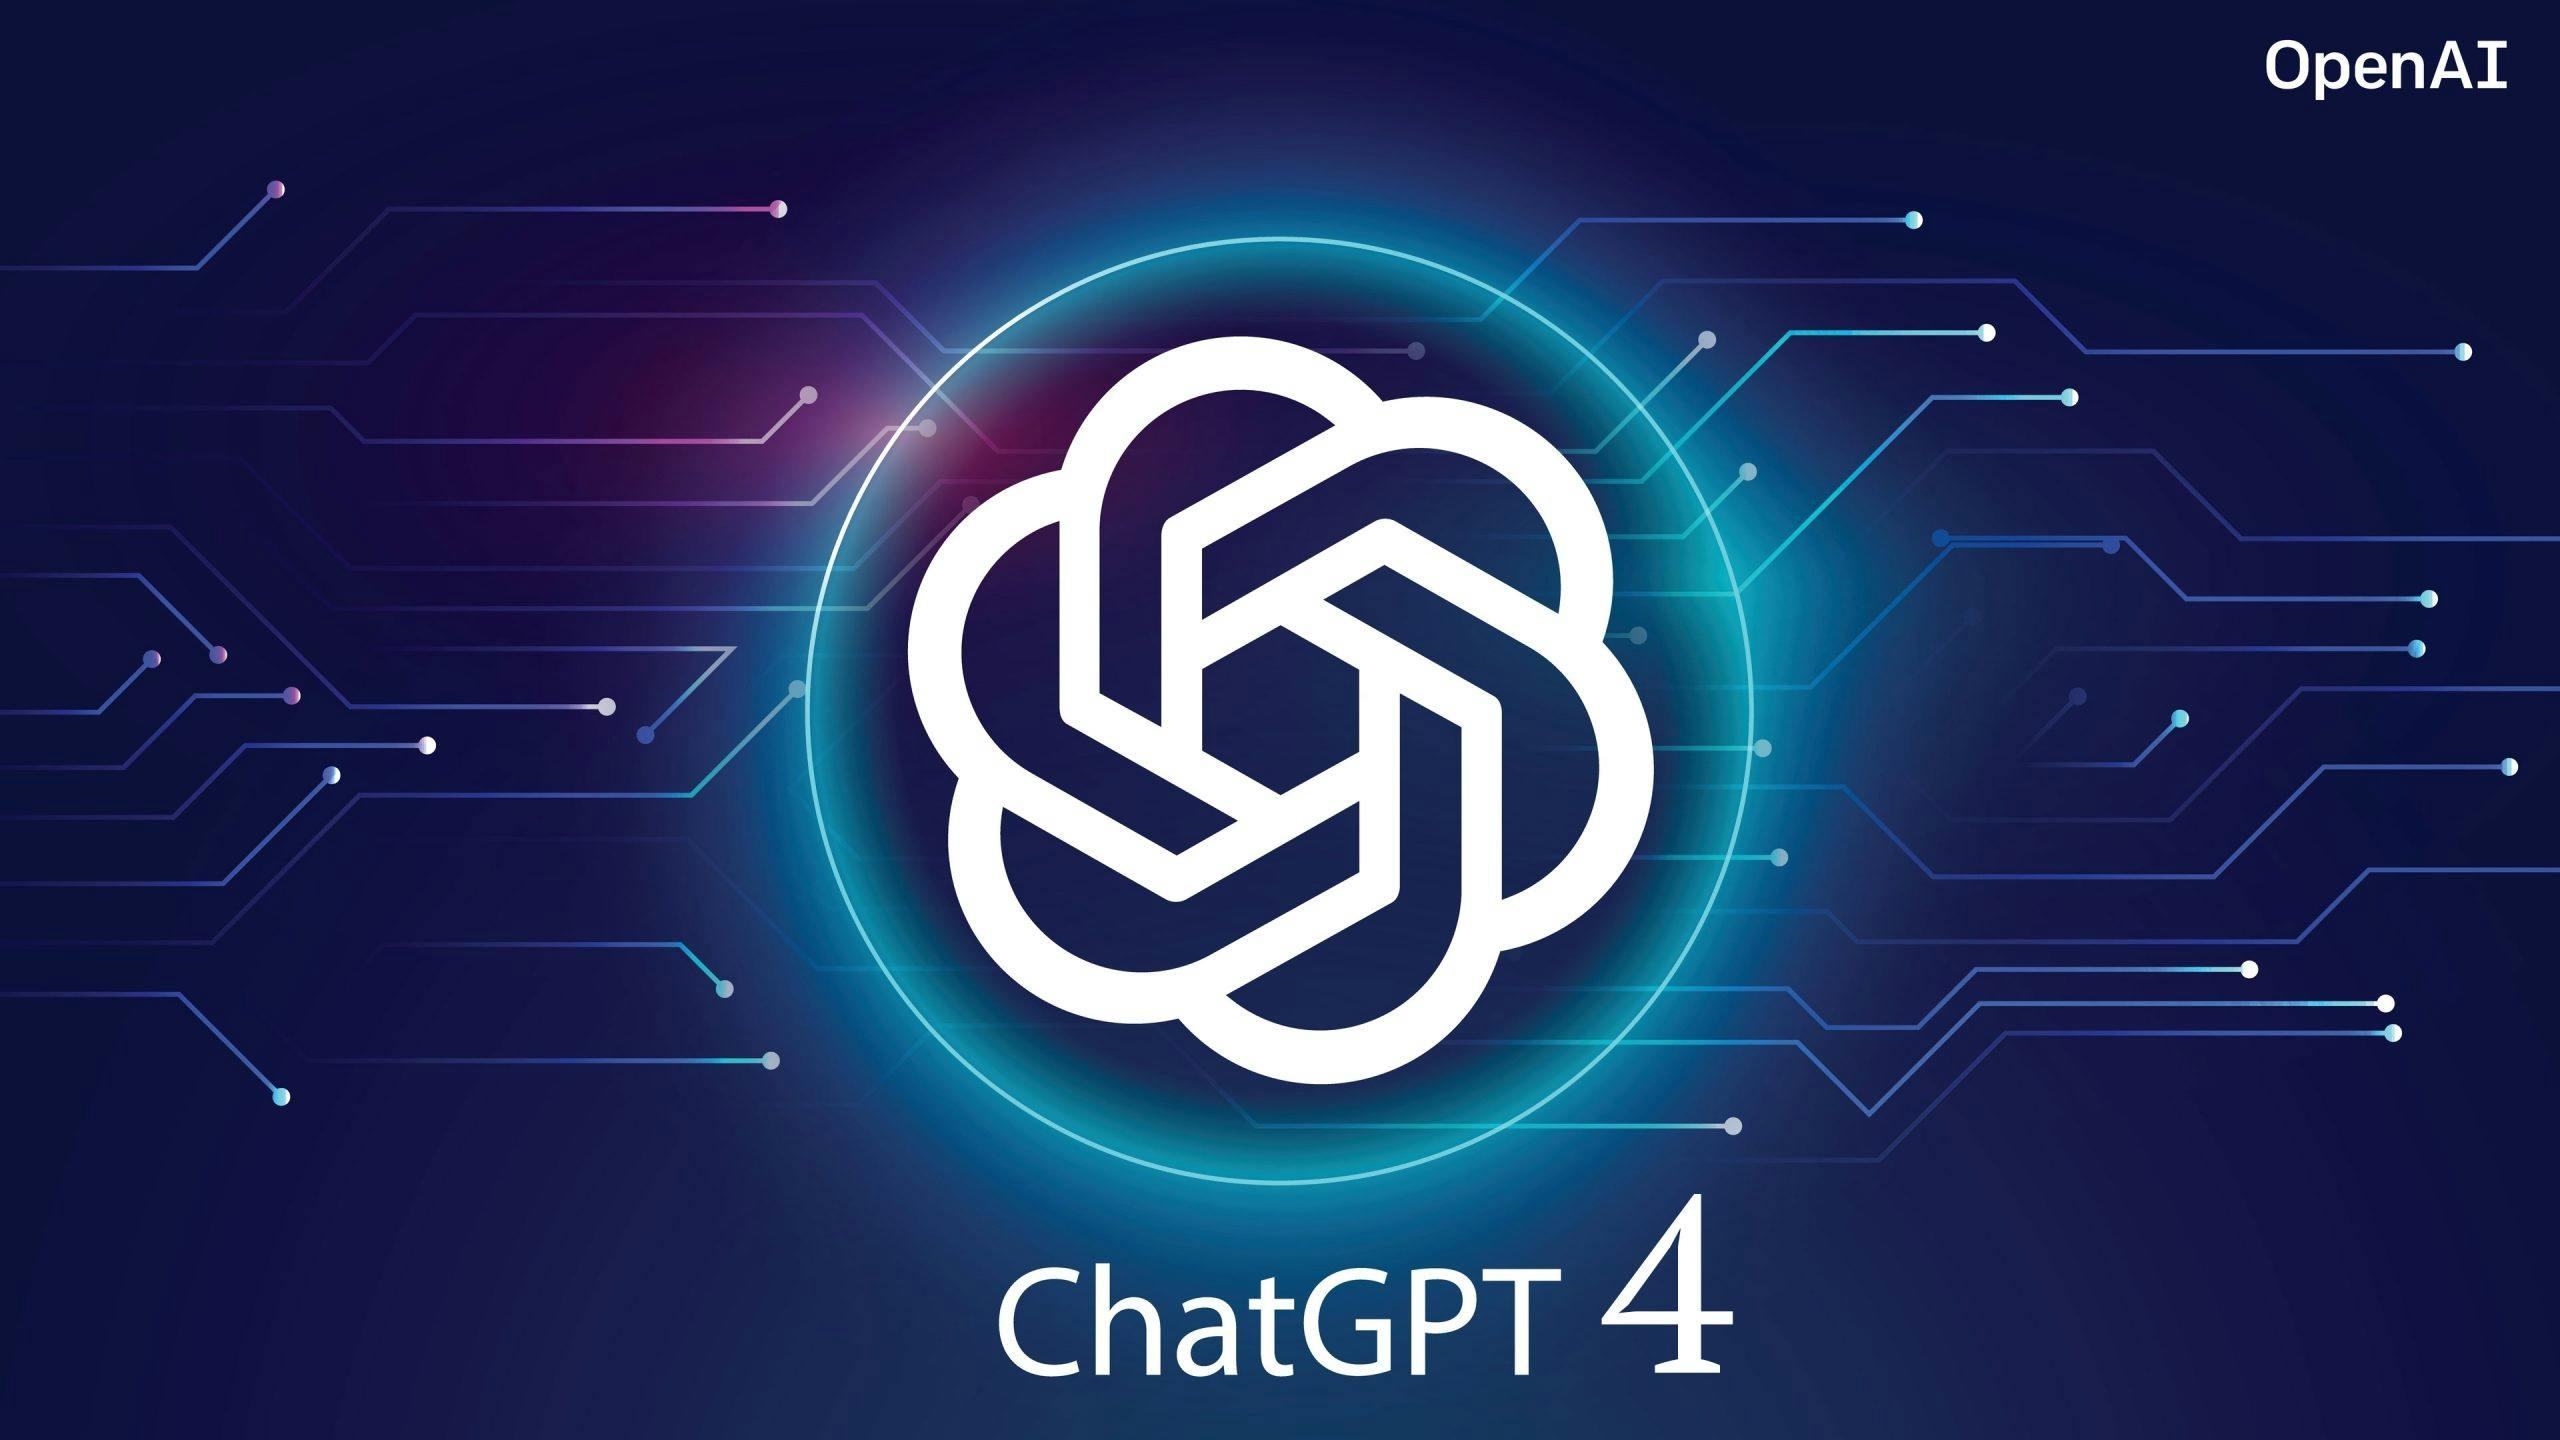 GPT-4 Released – The latest model from OpenAI